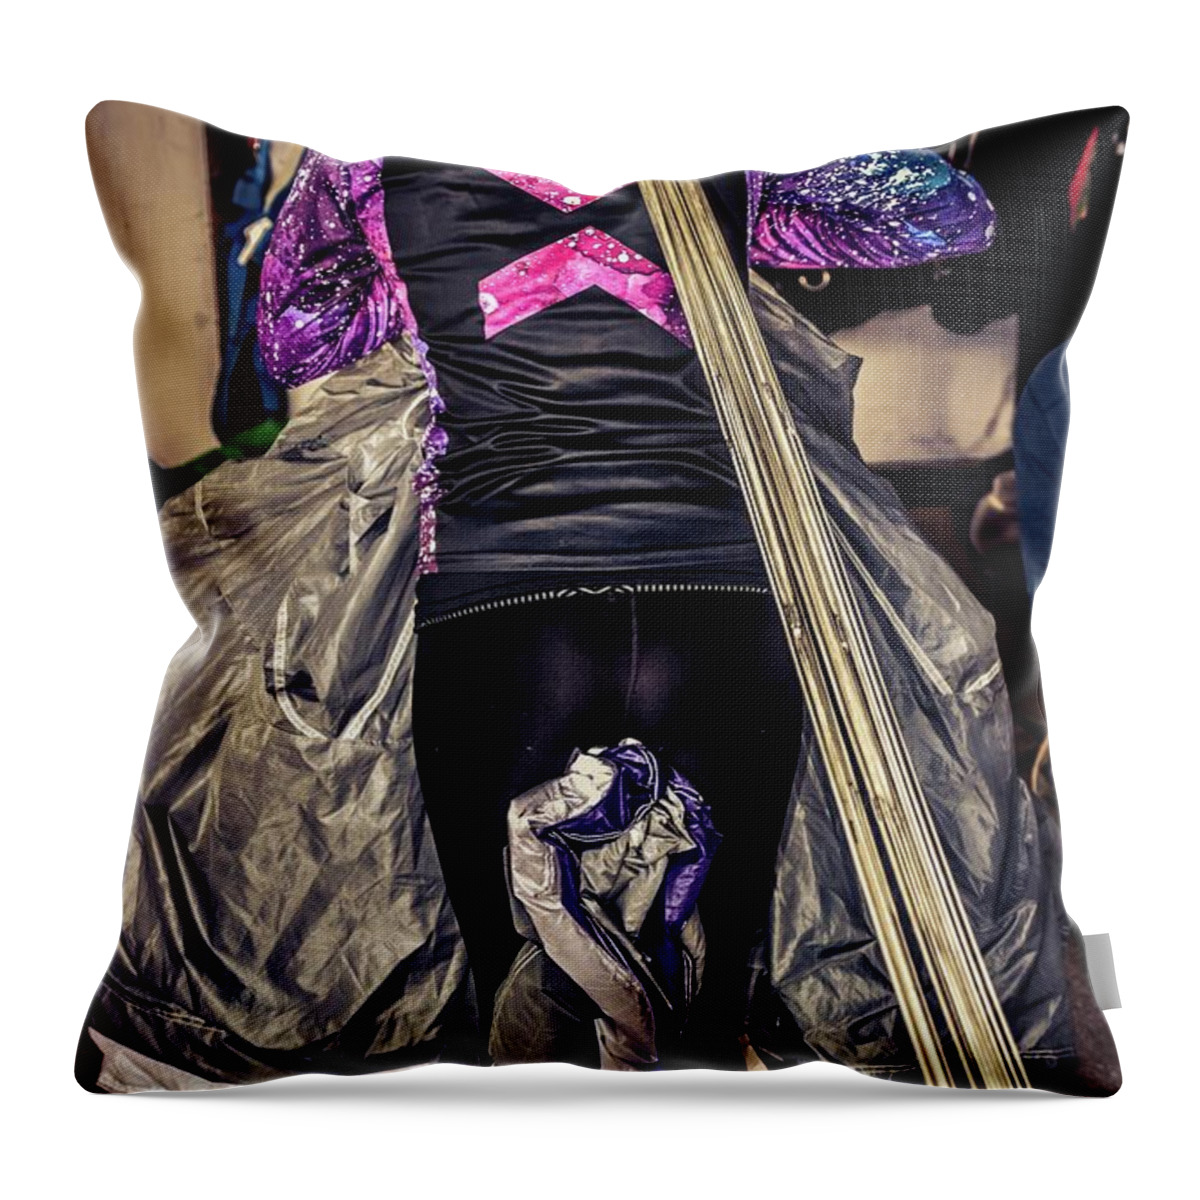 Paracute Throw Pillow featuring the photograph Missy's Dress by Larkin's Balcony Photography